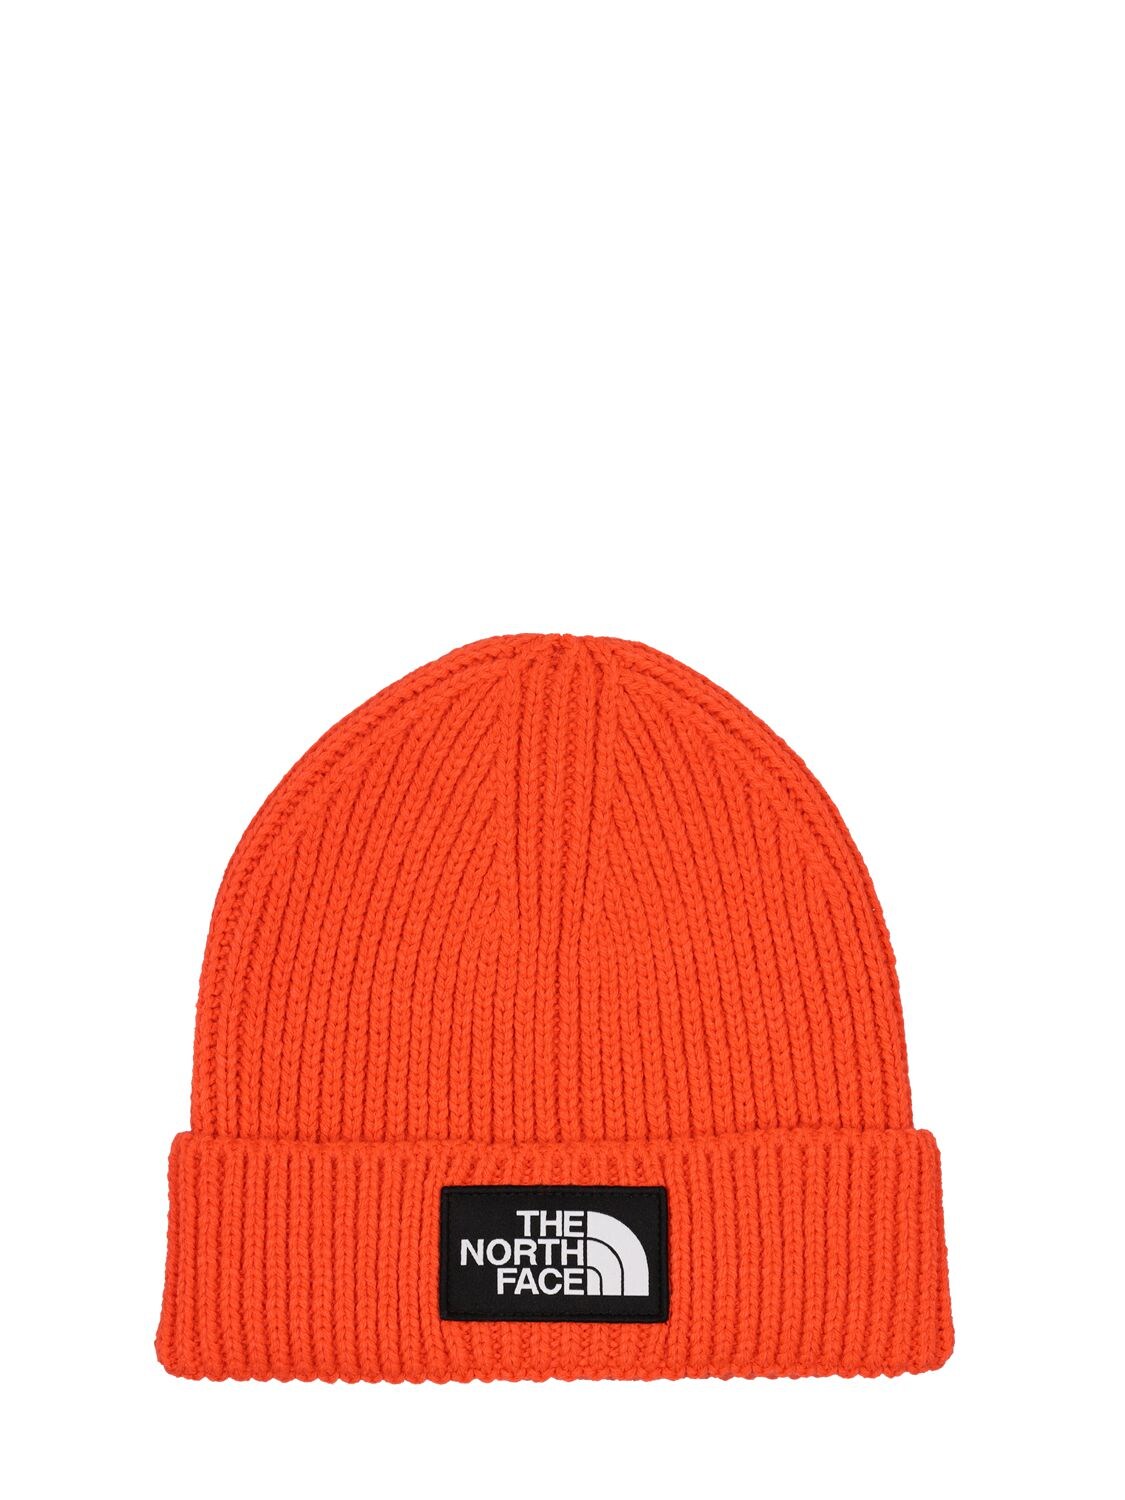 The North Face Logo Acrylic Blend Knit Beanie In Retro Orange